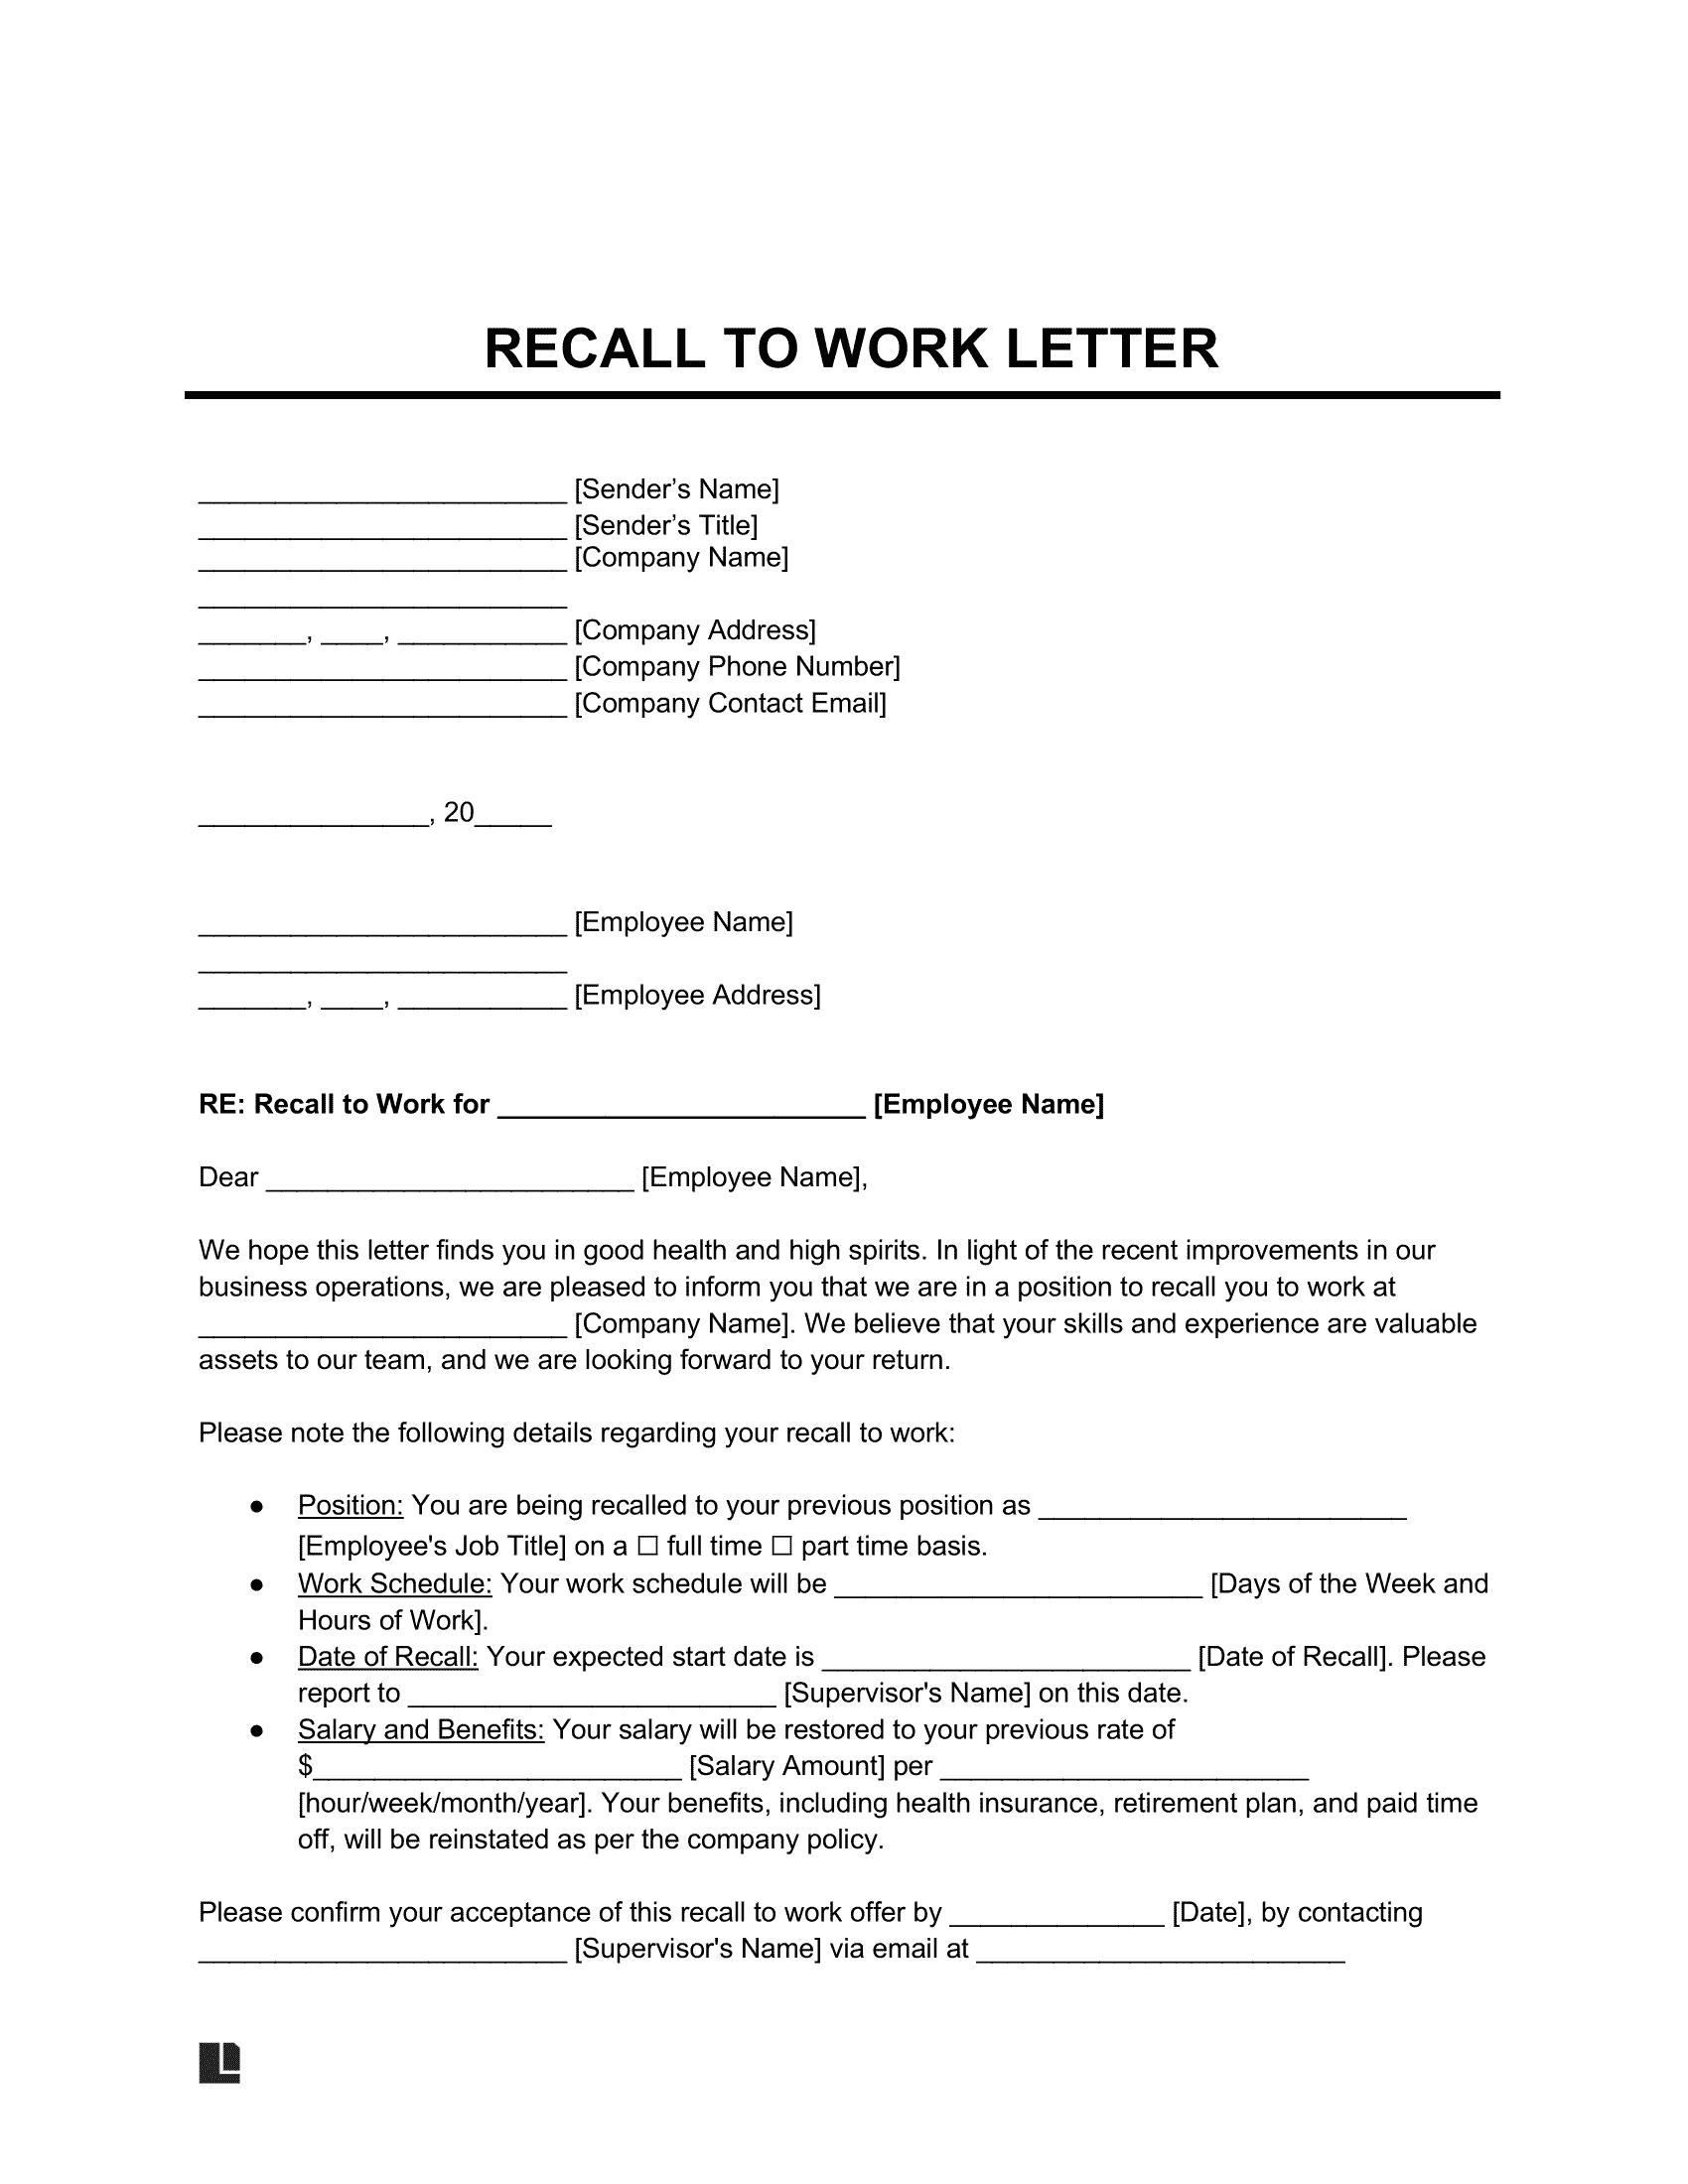 Recall to Work Letter Template